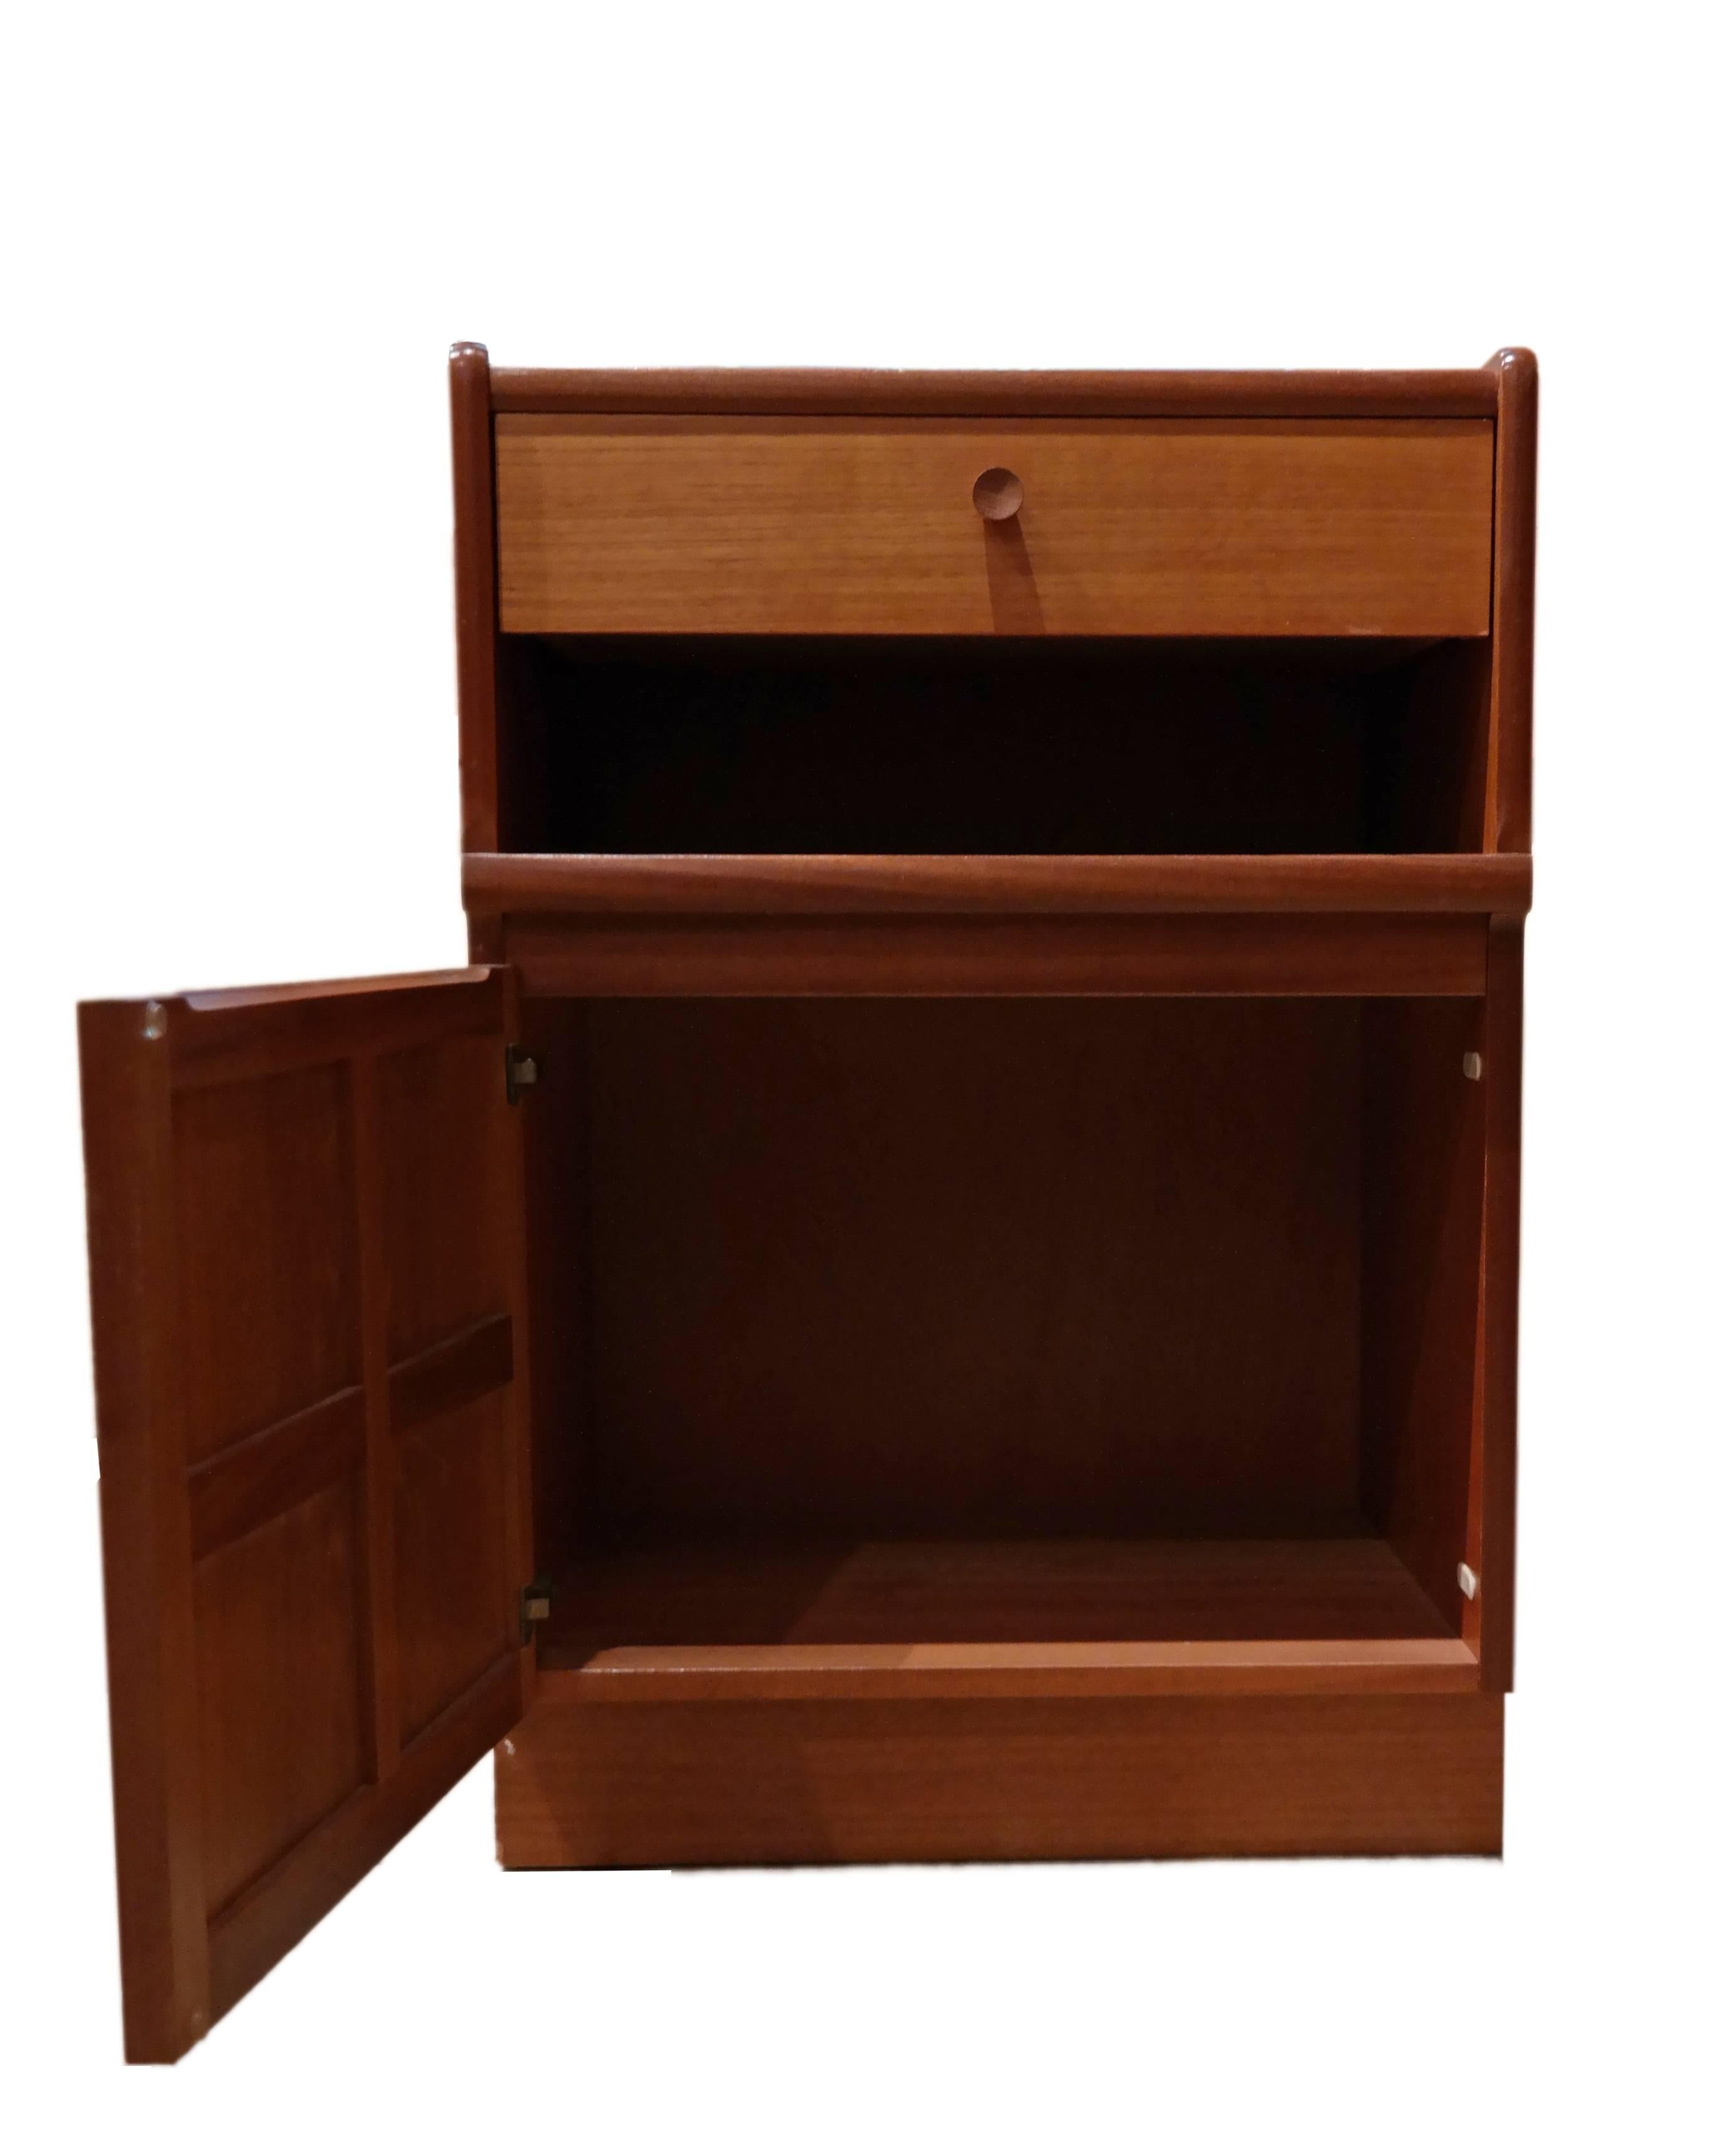 English made side cabinet by G-Plan, solid teak, made in the 1960s.